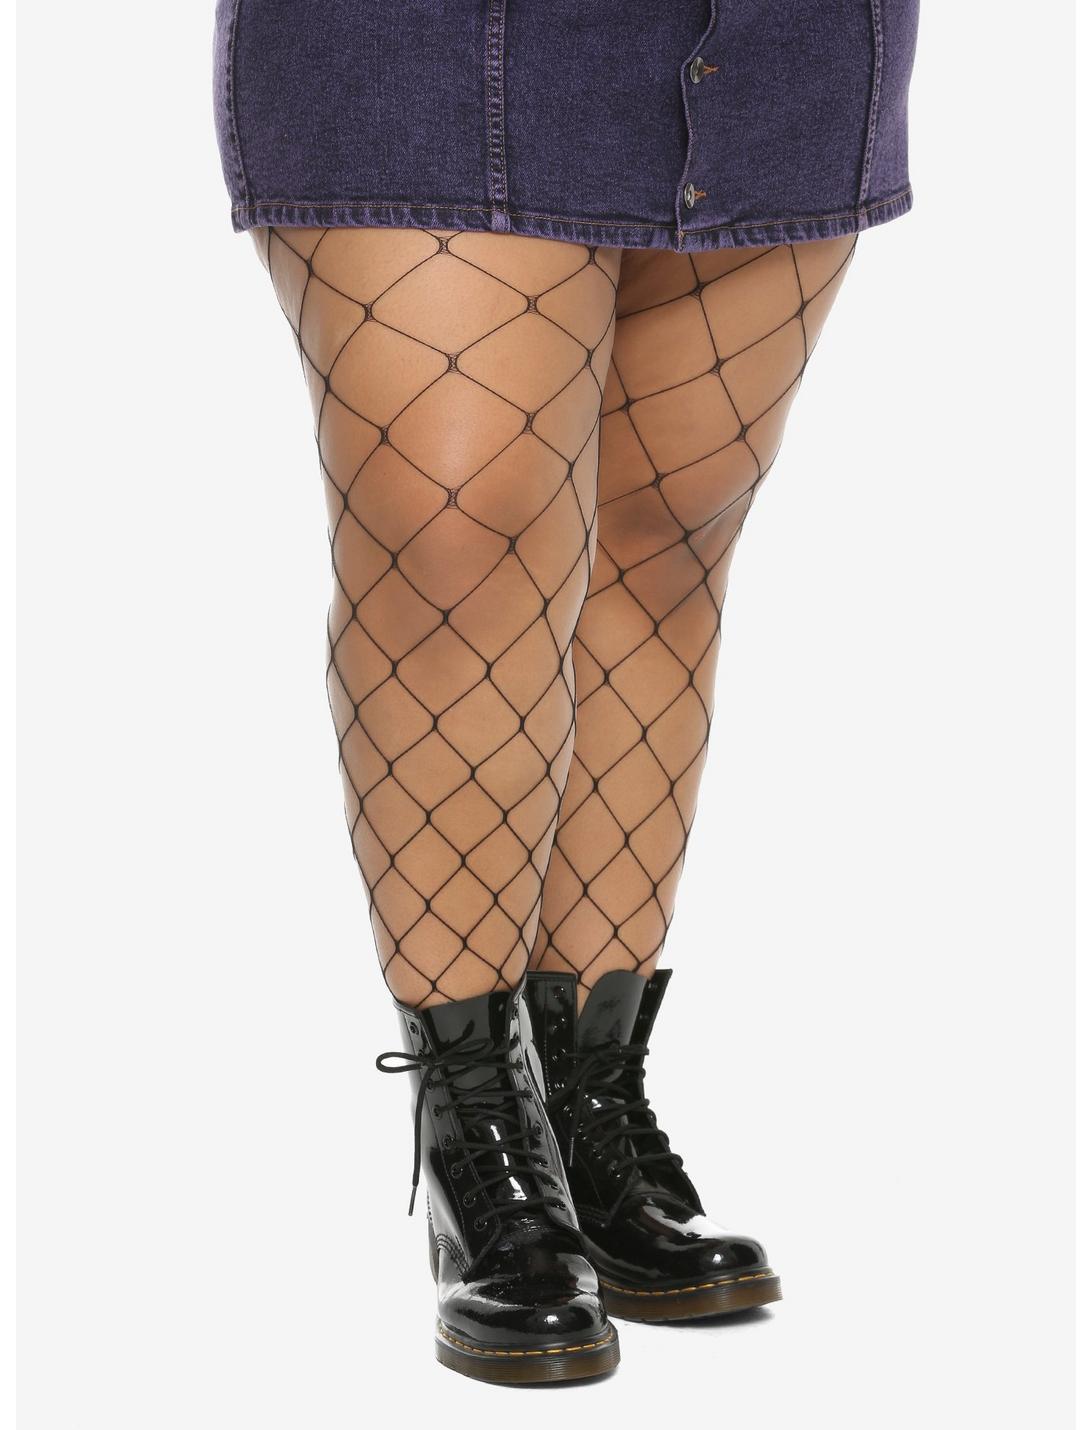 chipper smith recommends Plus Size Net Stockings